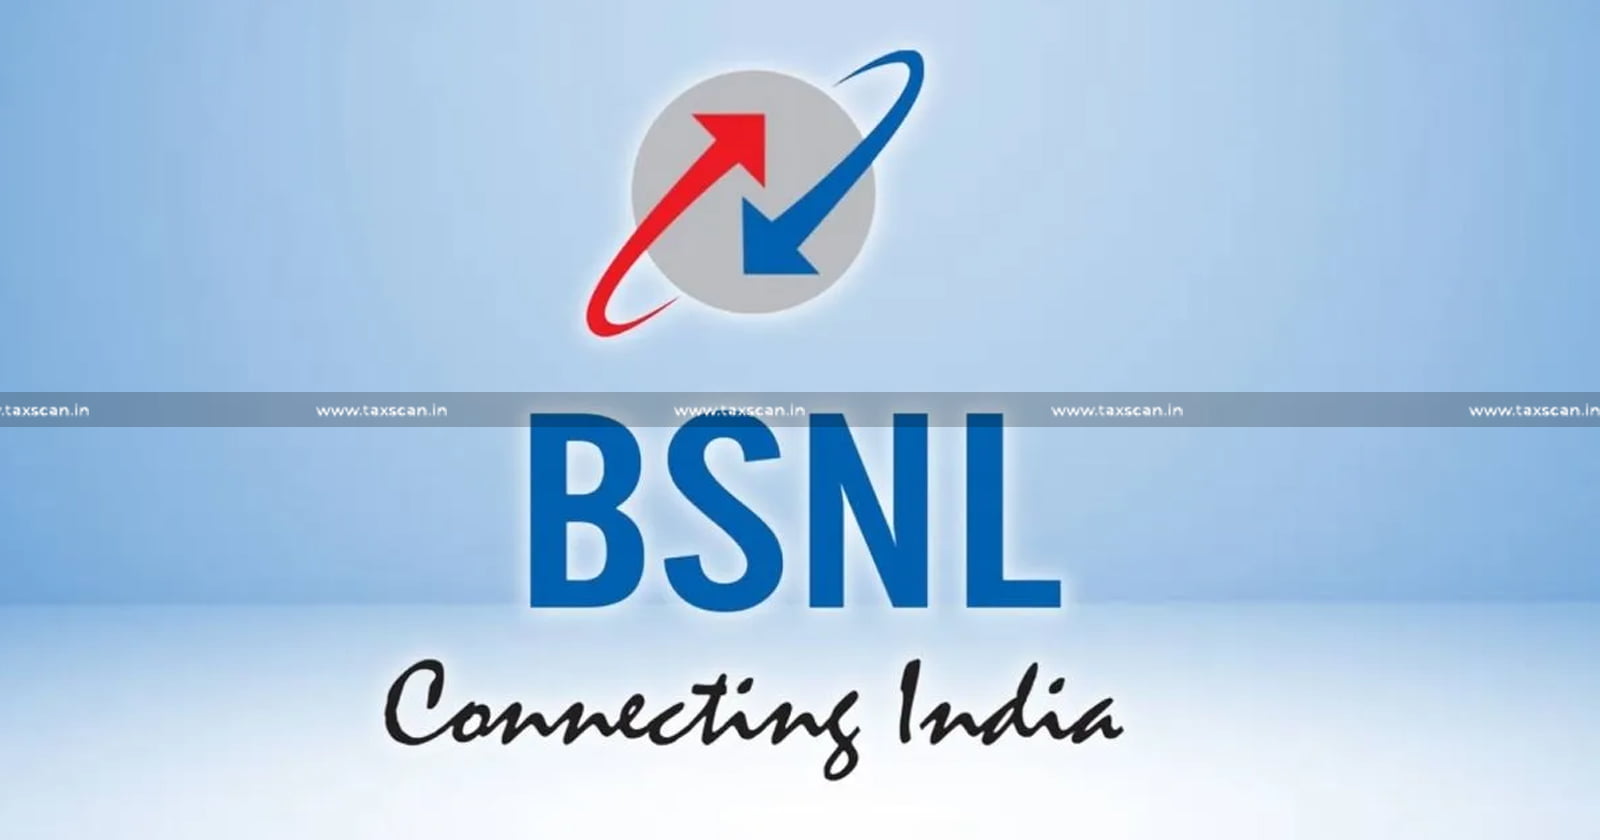 Commission - BSNL - Recharge Coupon - Mobile Connection - Service Tax - Business Auxiliary Services - CESTAT - taxscan